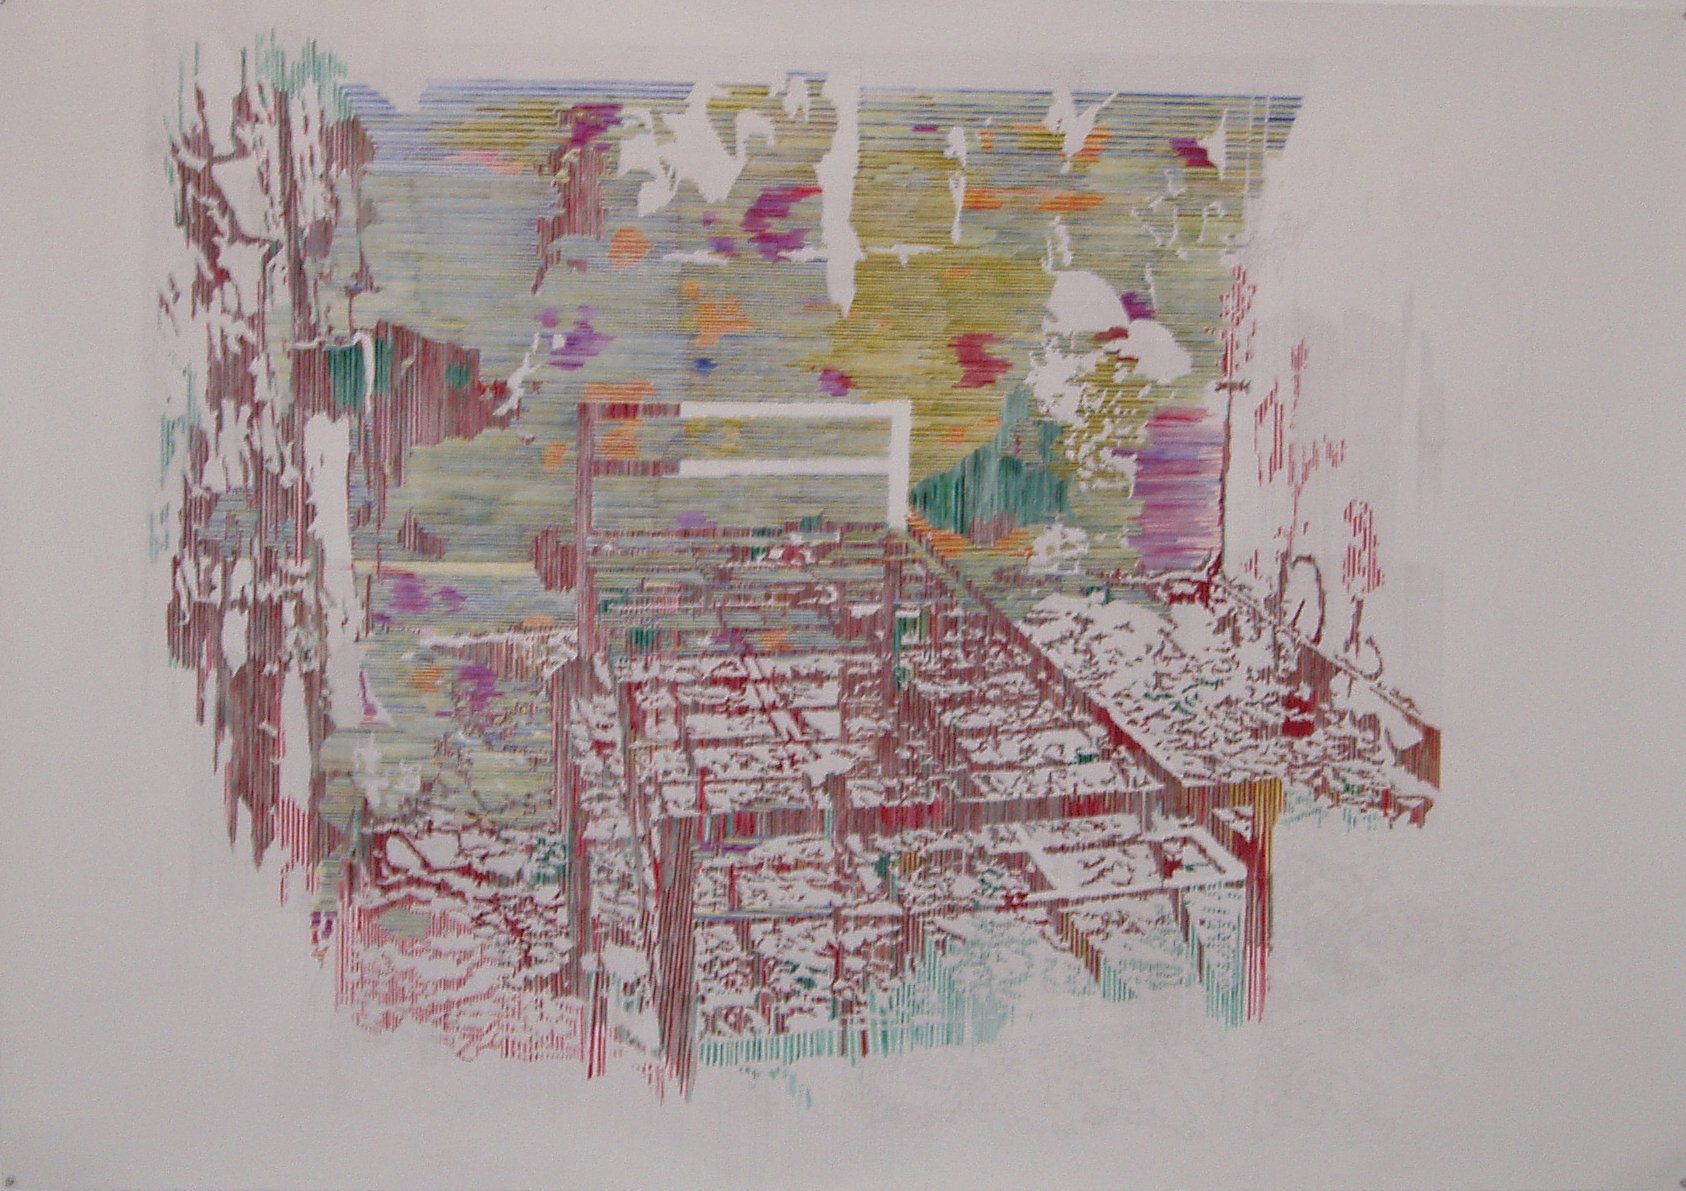 Lucy Skaer, _Solid Ground - Tibia_, 2006, pencil and watercolour on paper, 140 x 200 cm.JPG